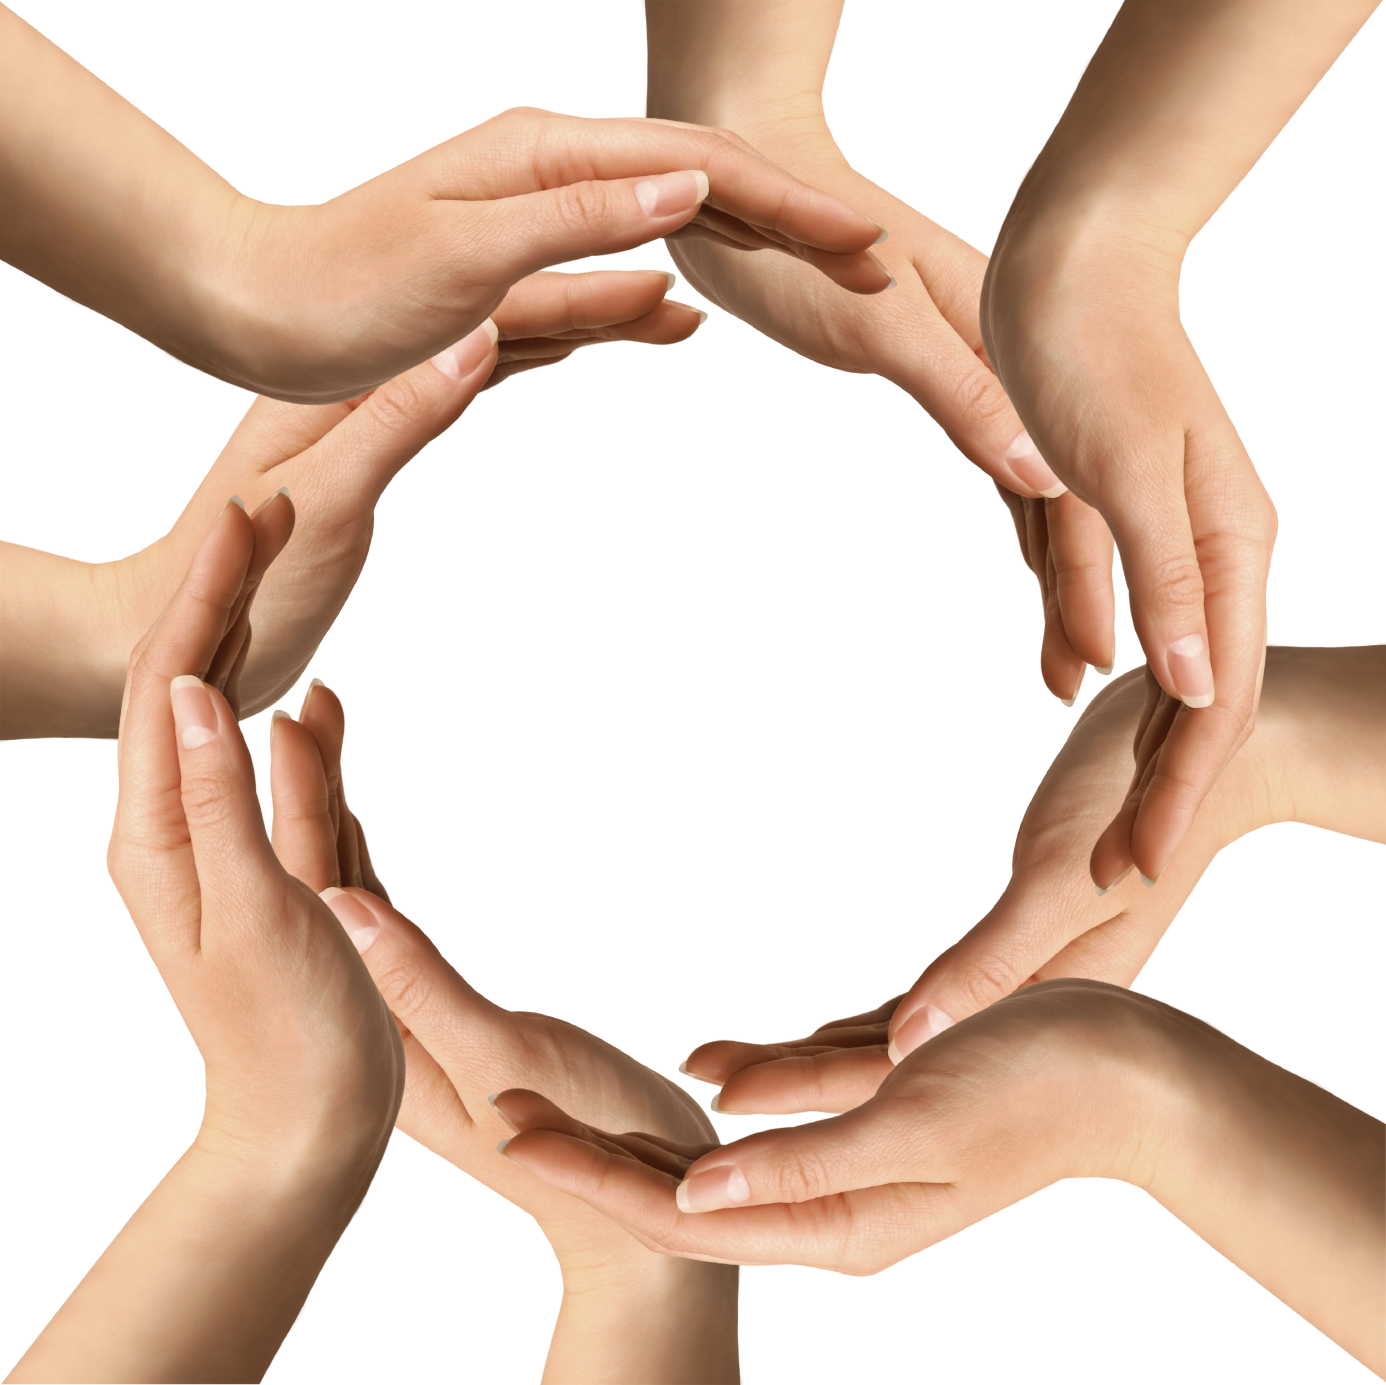 collaboration hands clipart